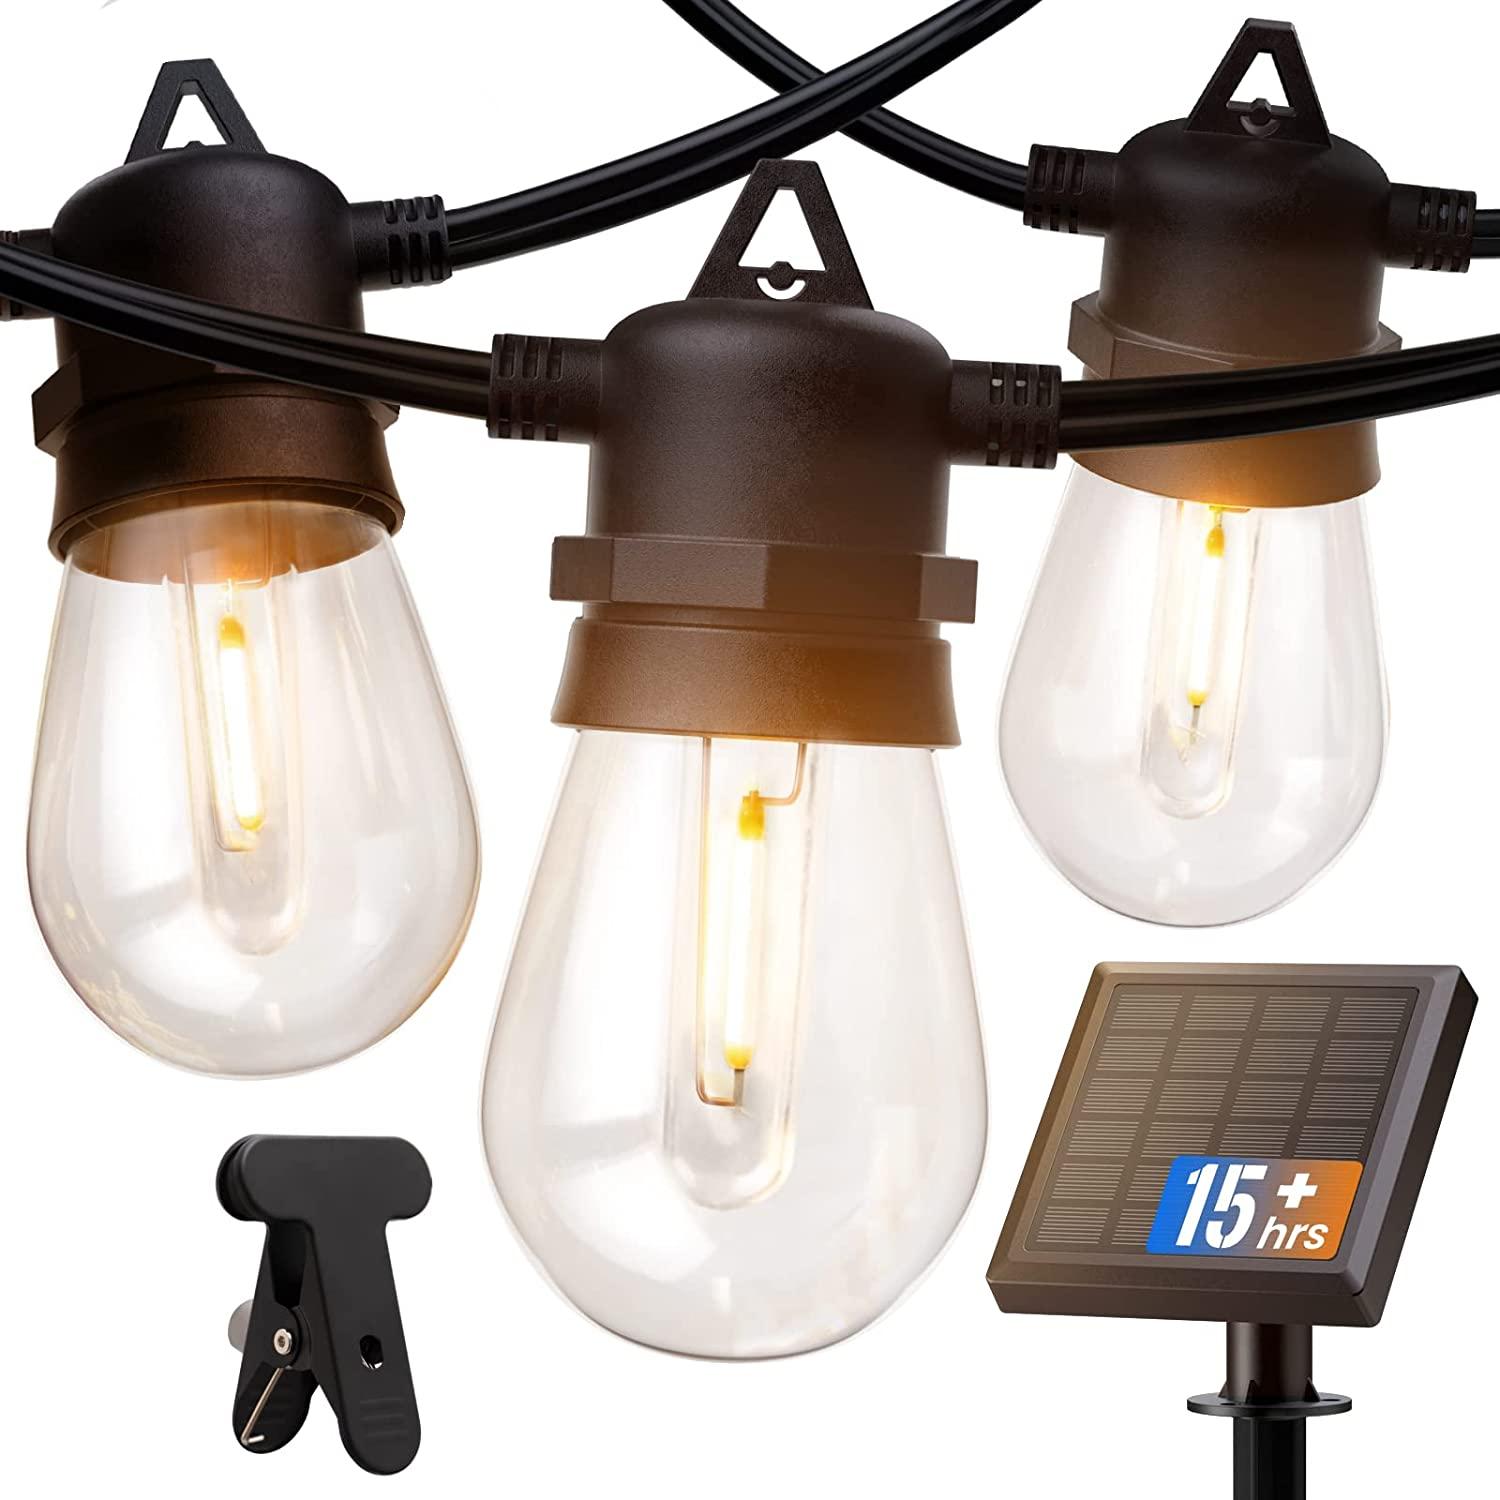 31ft Solar String Outdoor Lights for $19.99 Shipped